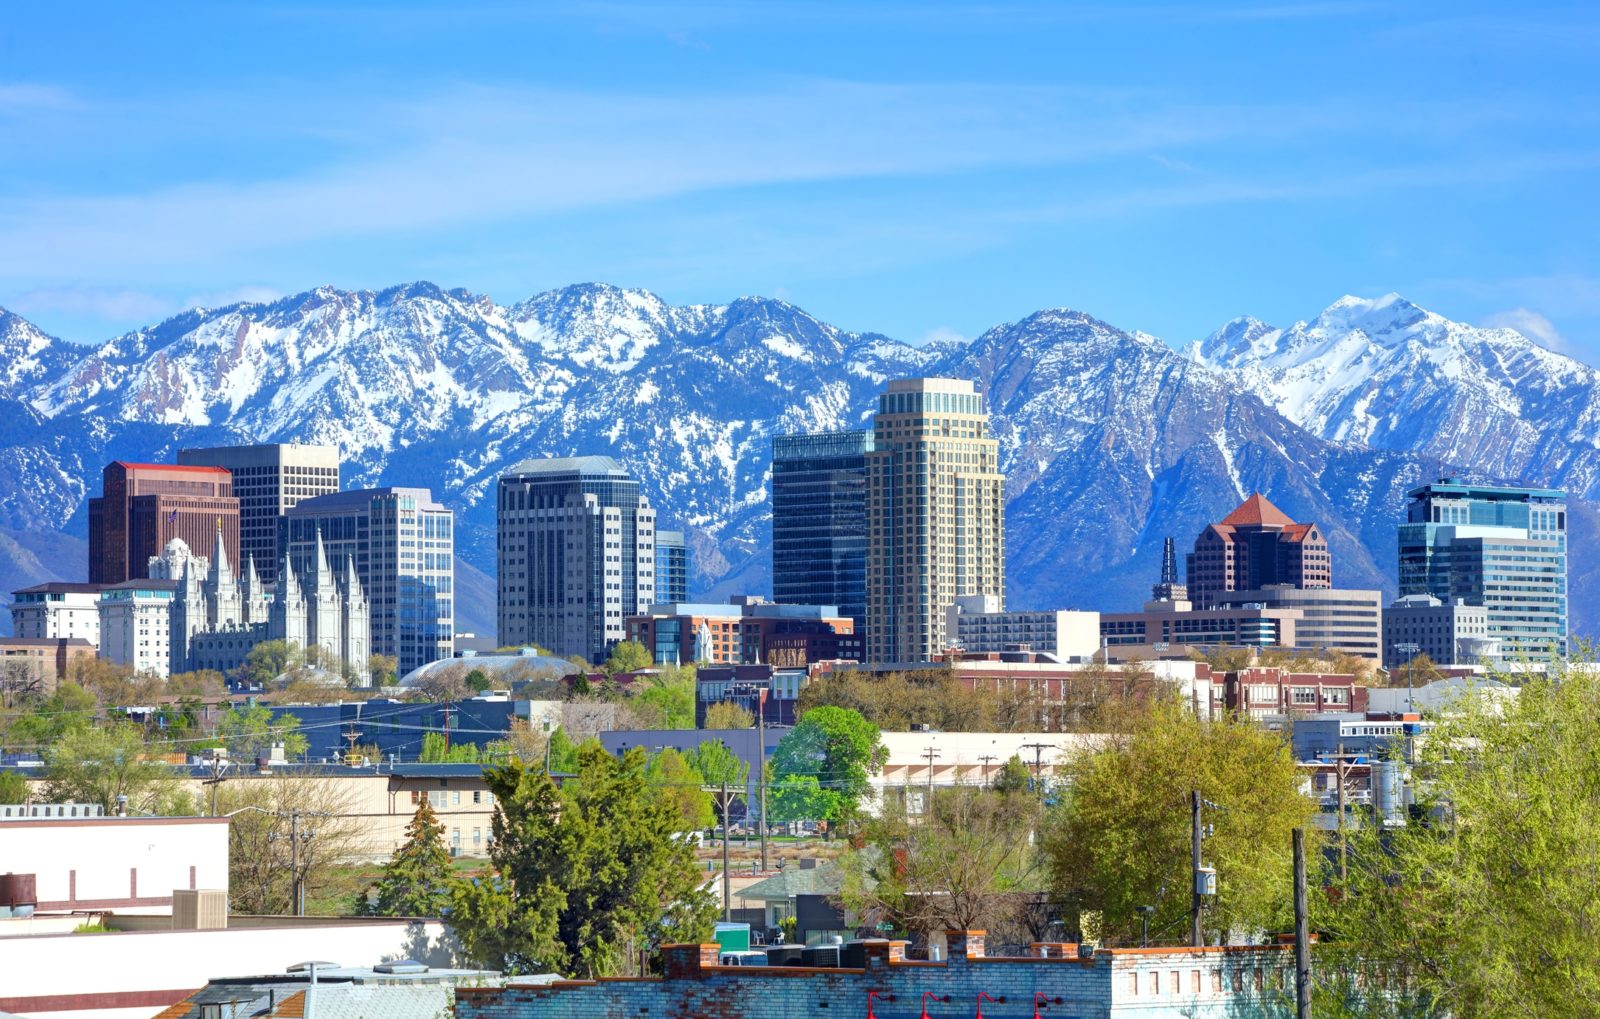 How to Get a Utah Real Estate License in 5 Easy Steps